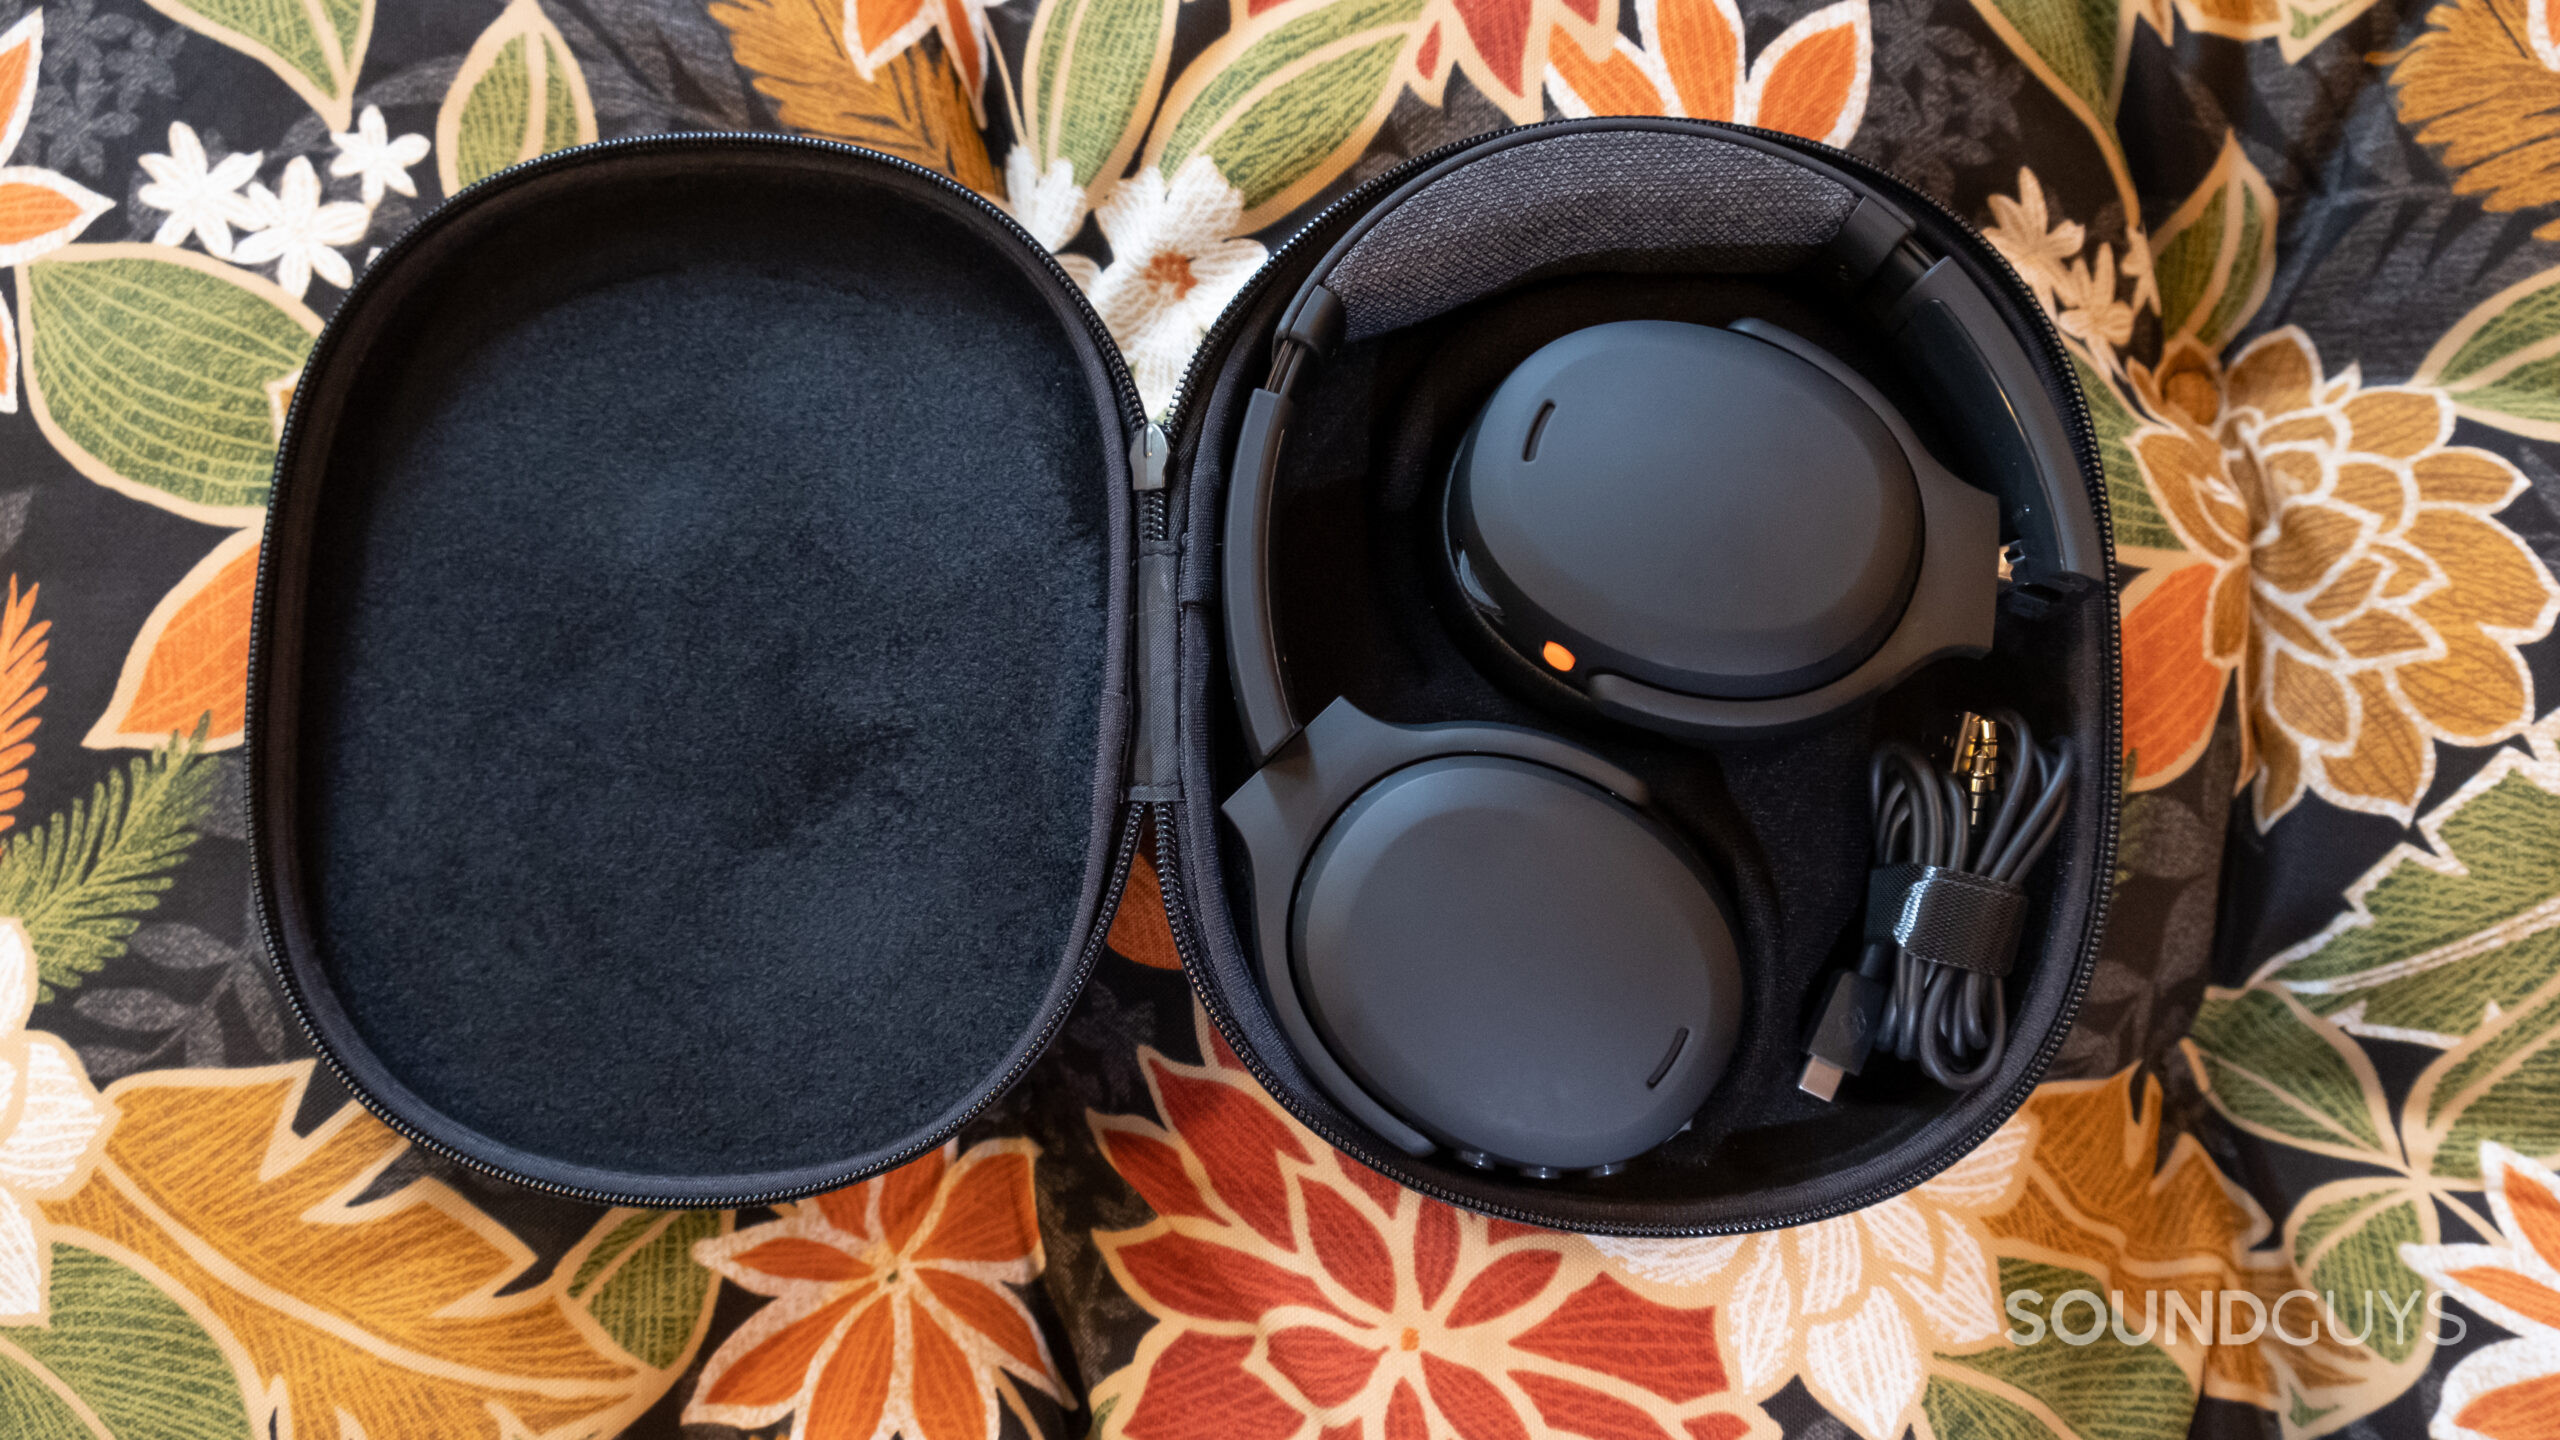 The Skullcandy Crusher ANC 2 folded into its open case with accessories.